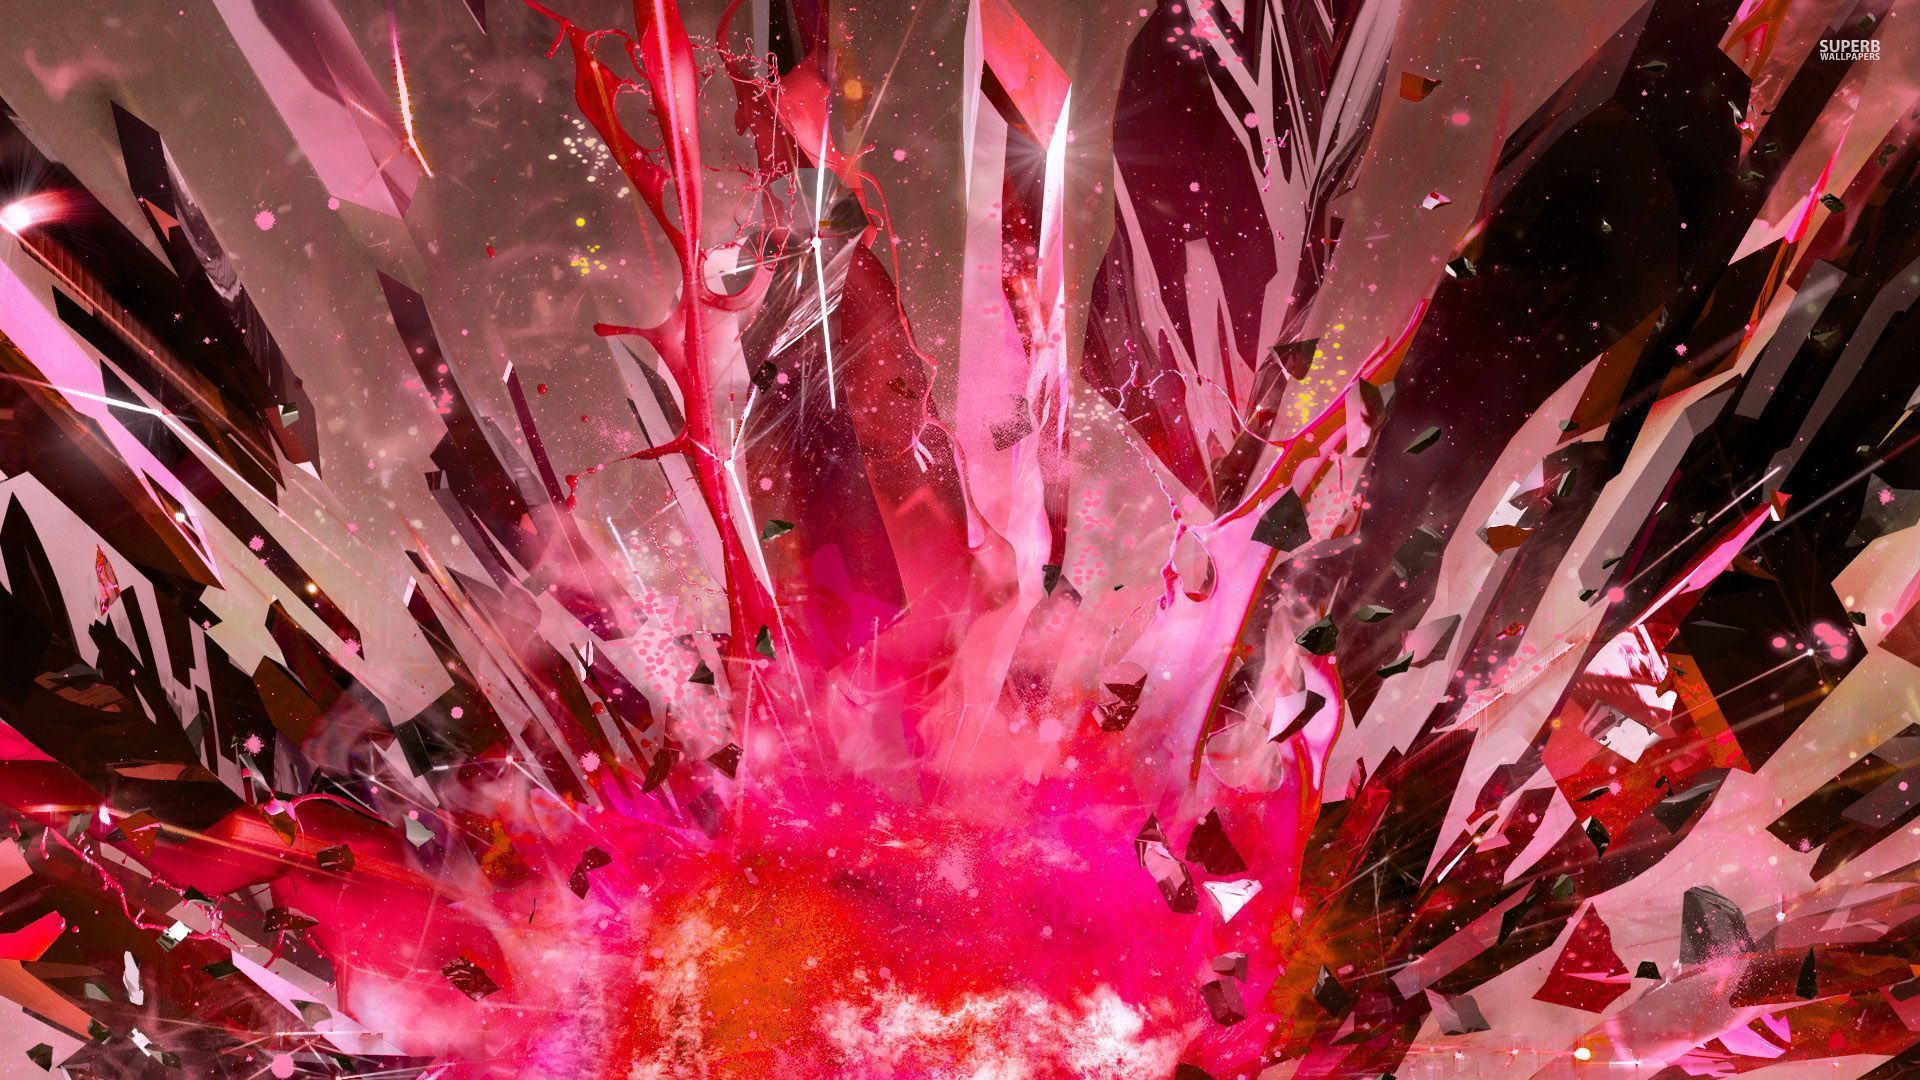 Pink exploding crystals Desktop and mobile wallpaper Wallippo